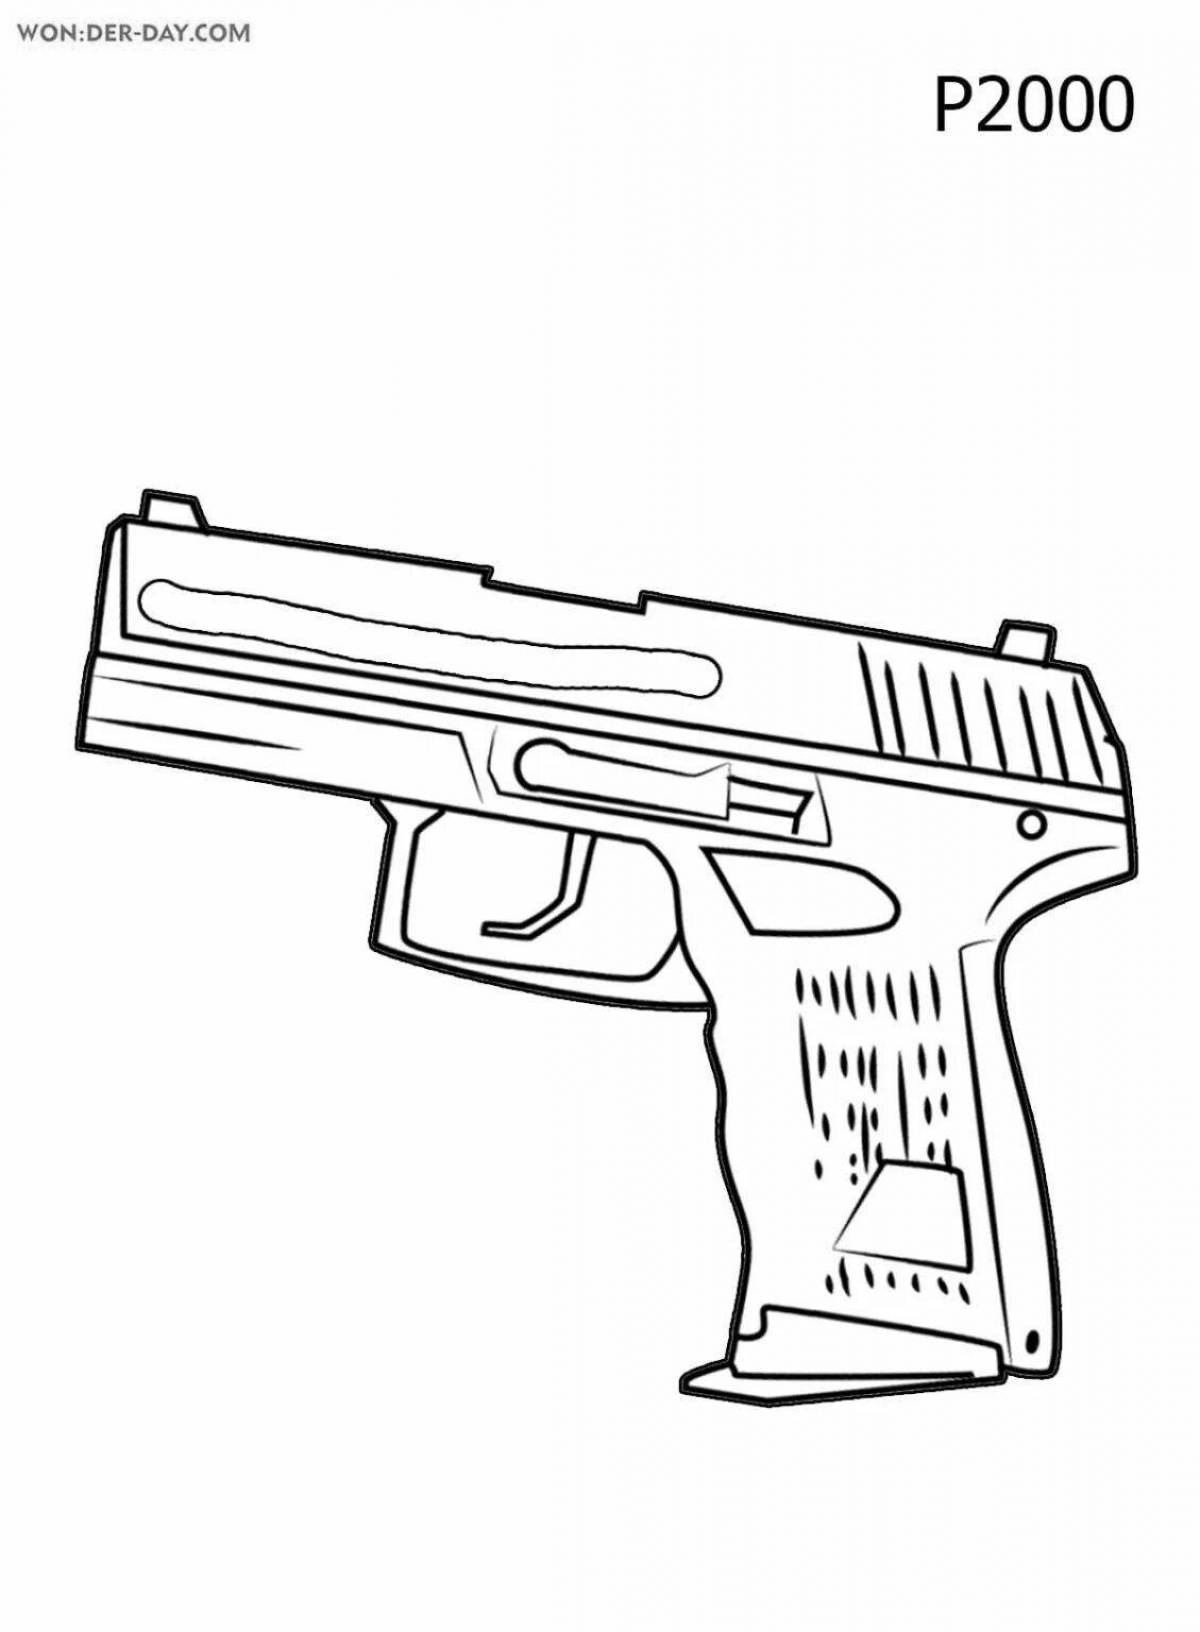 Fun coloring page of confrontation weapons